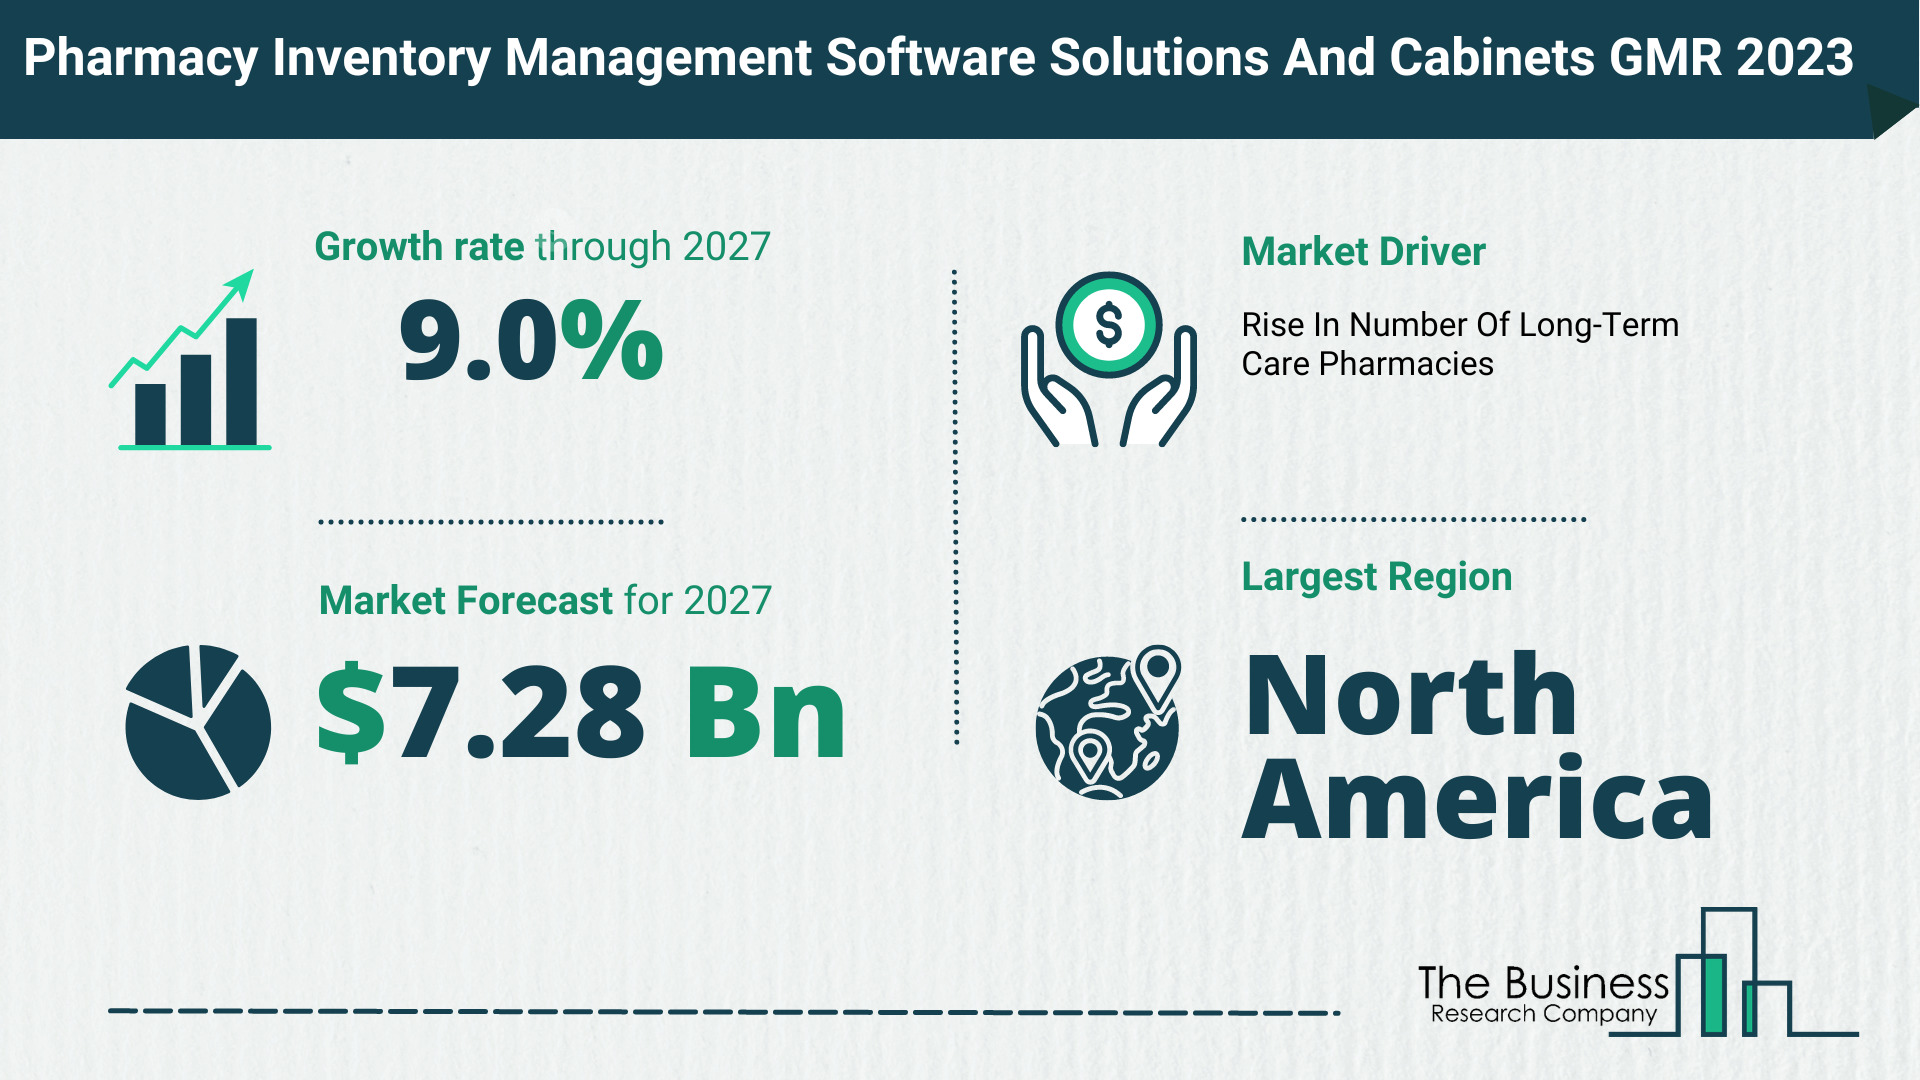 Global Pharmacy Inventory Management Software Solutions And Cabinets Market